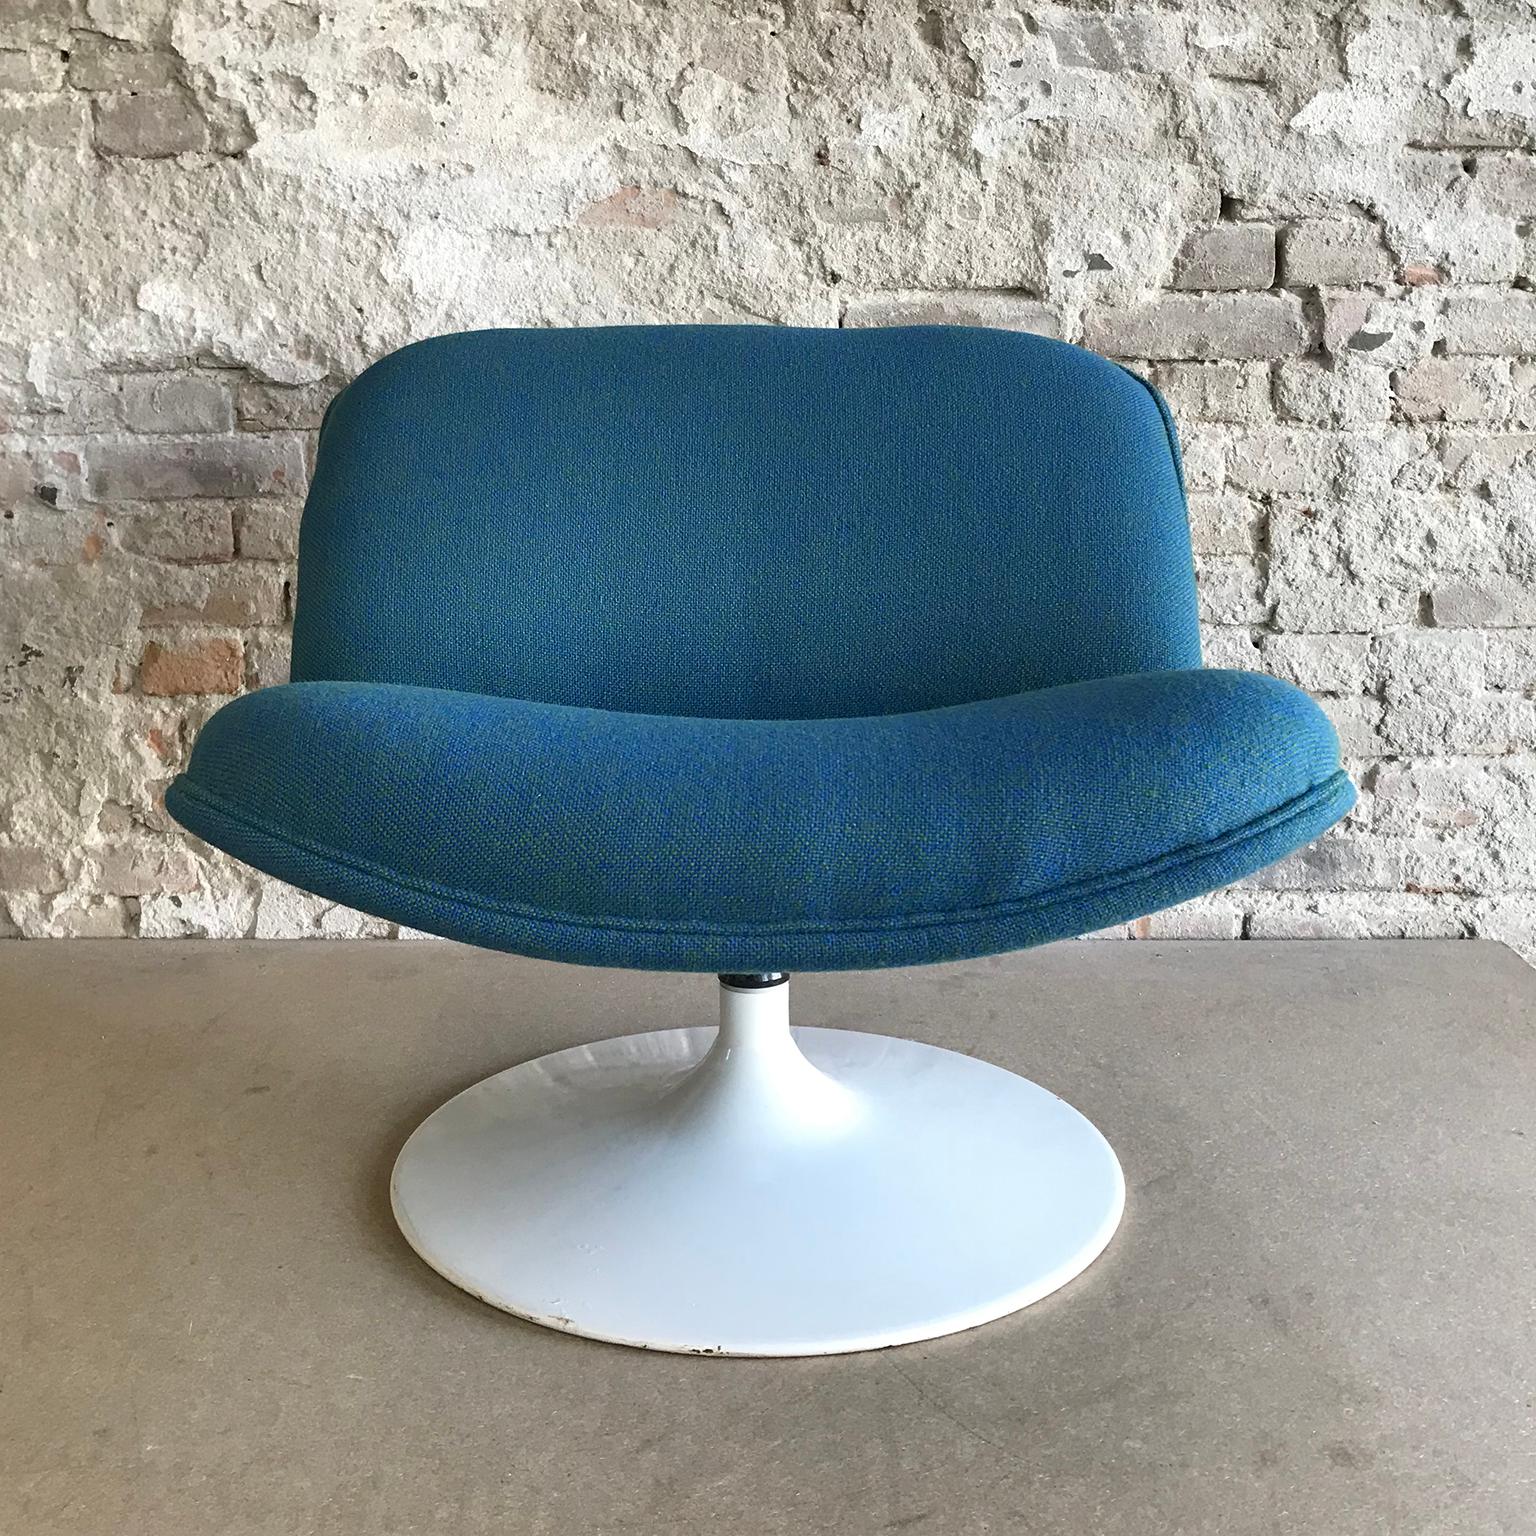 Metal 1977, Geoffrey Harcourt, Artifort 508 Chair by New Upholstery Blue Green Fabric